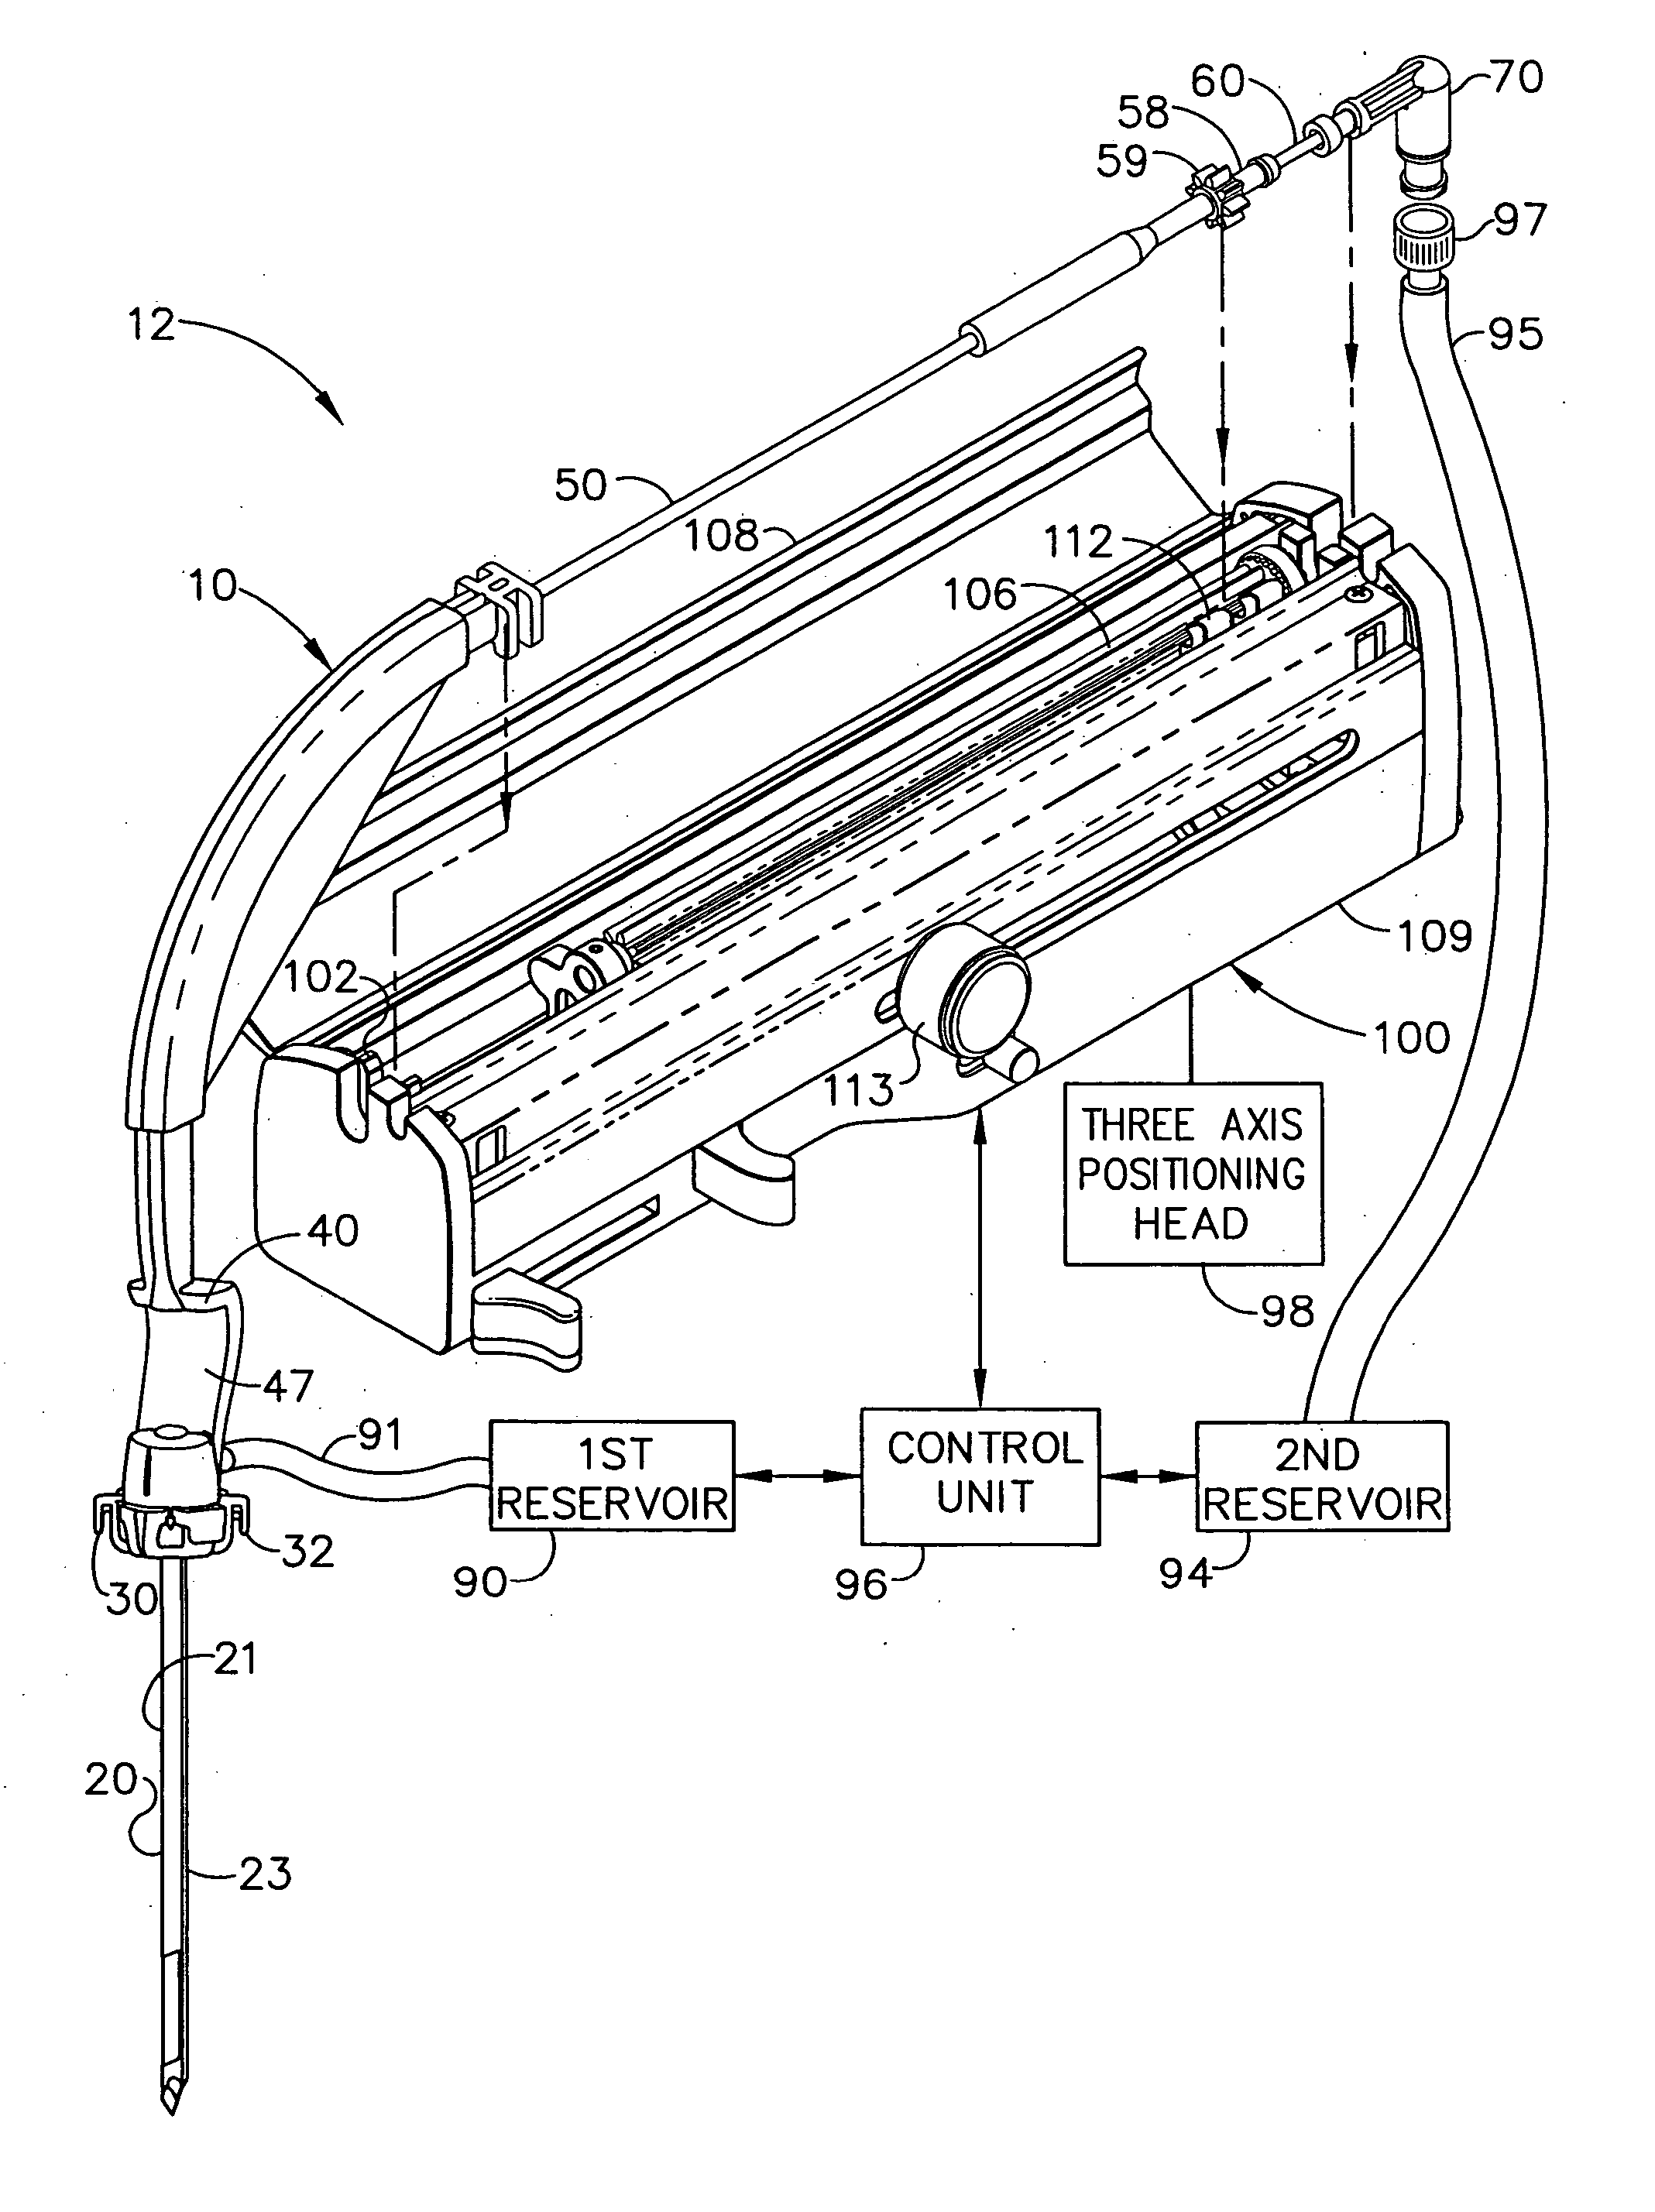 Surgical biopsy device having a flexible cutter